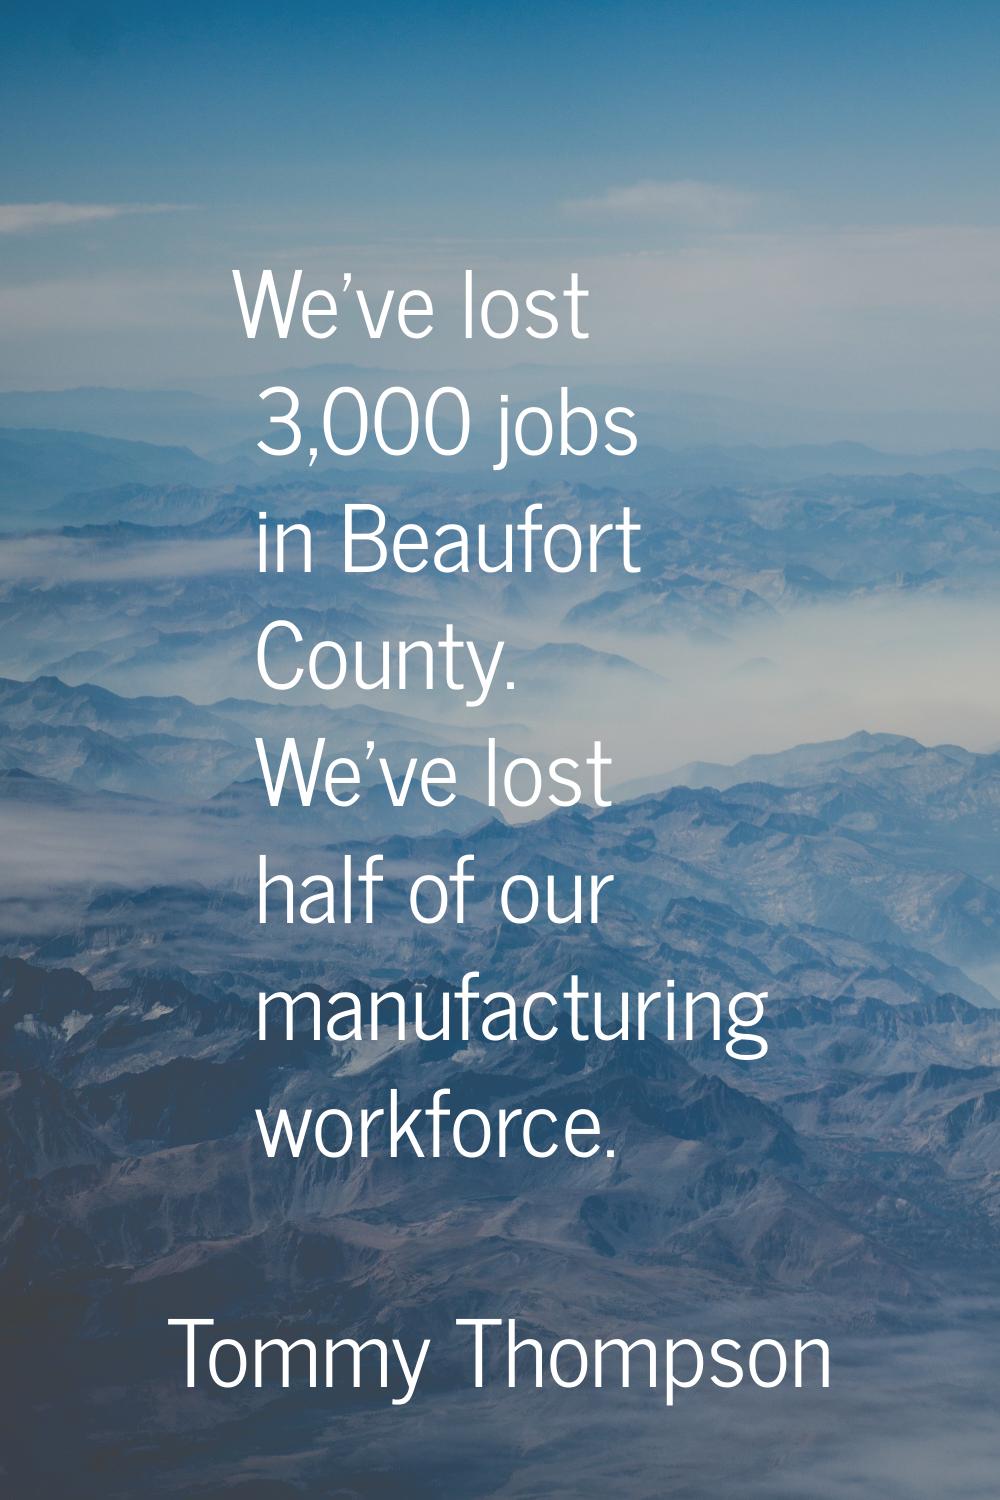 We've lost 3,000 jobs in Beaufort County. We've lost half of our manufacturing workforce.